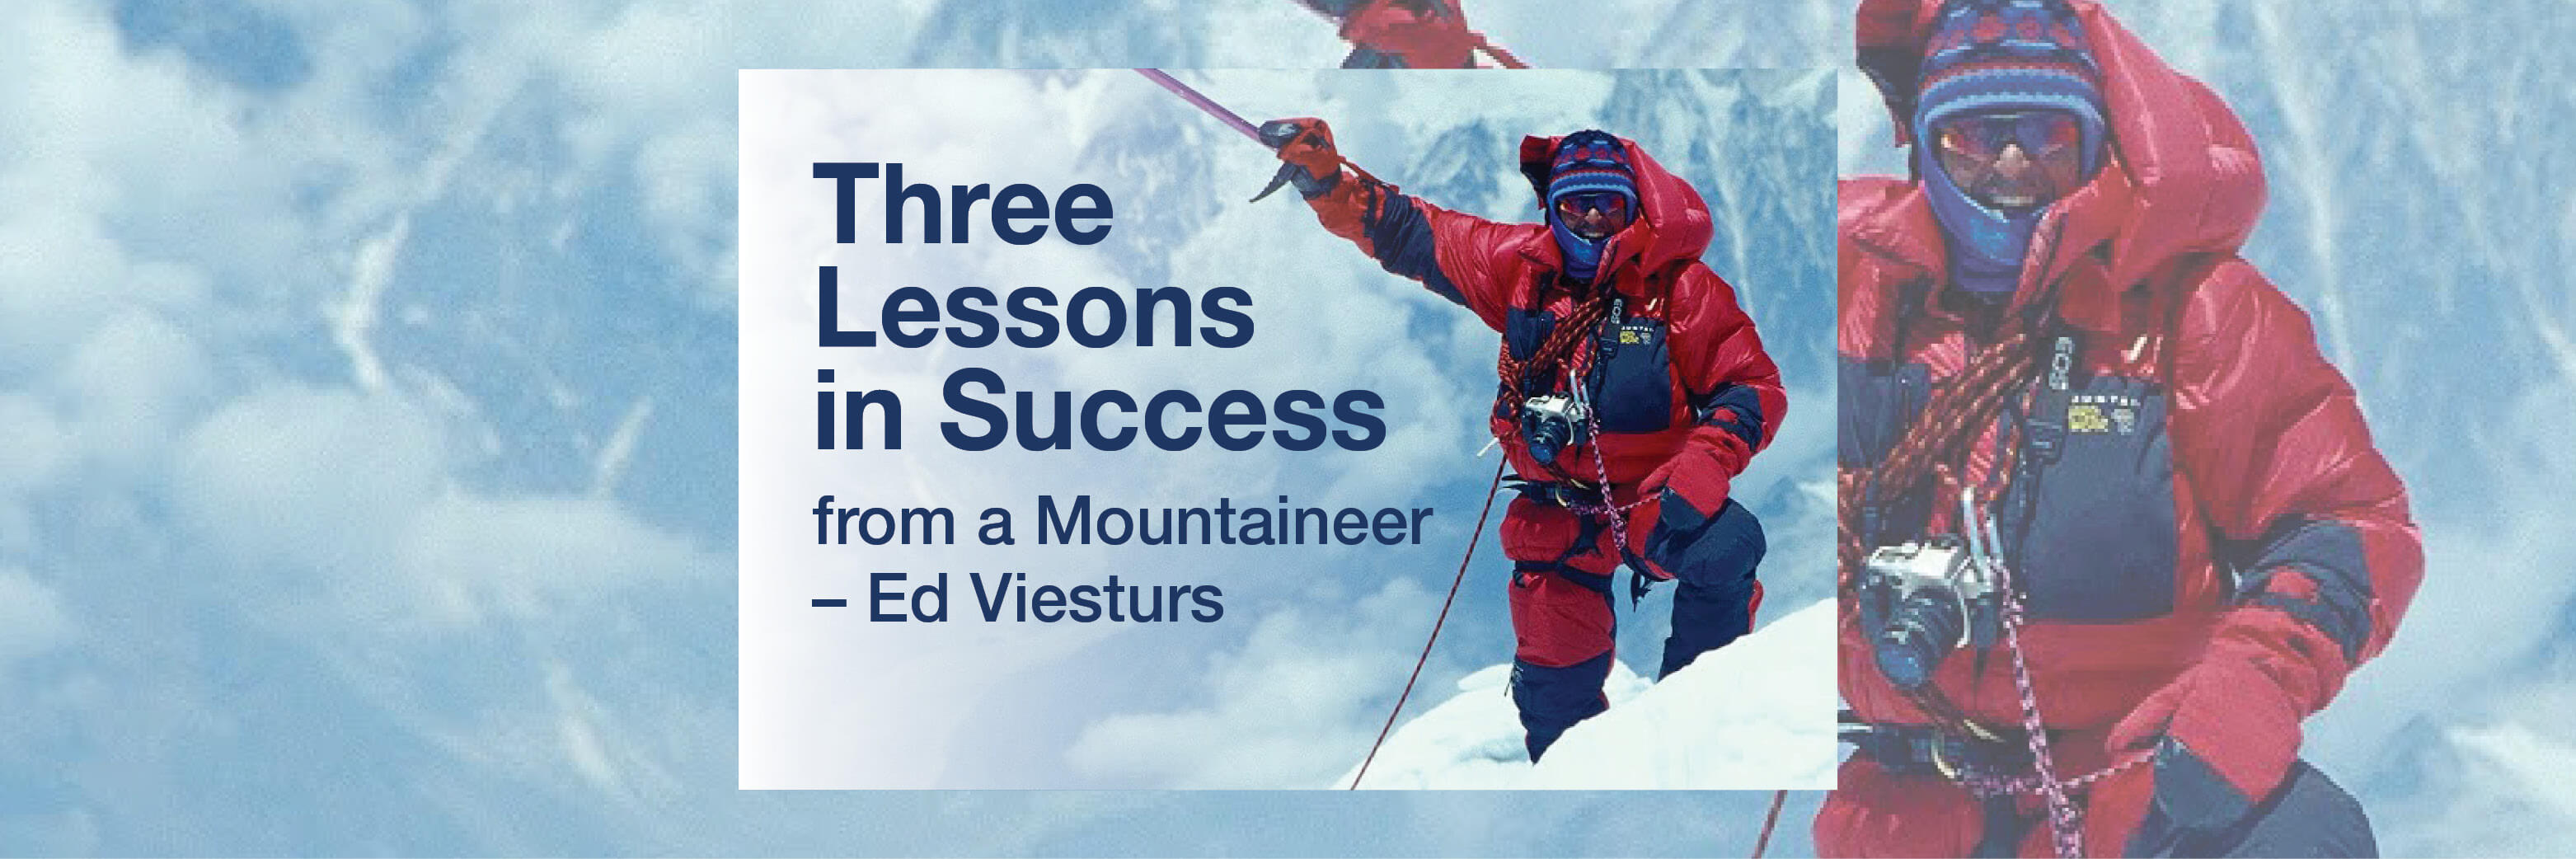 Three Lessons in Success from a World-Class Mountaineer - Ed Viesturs